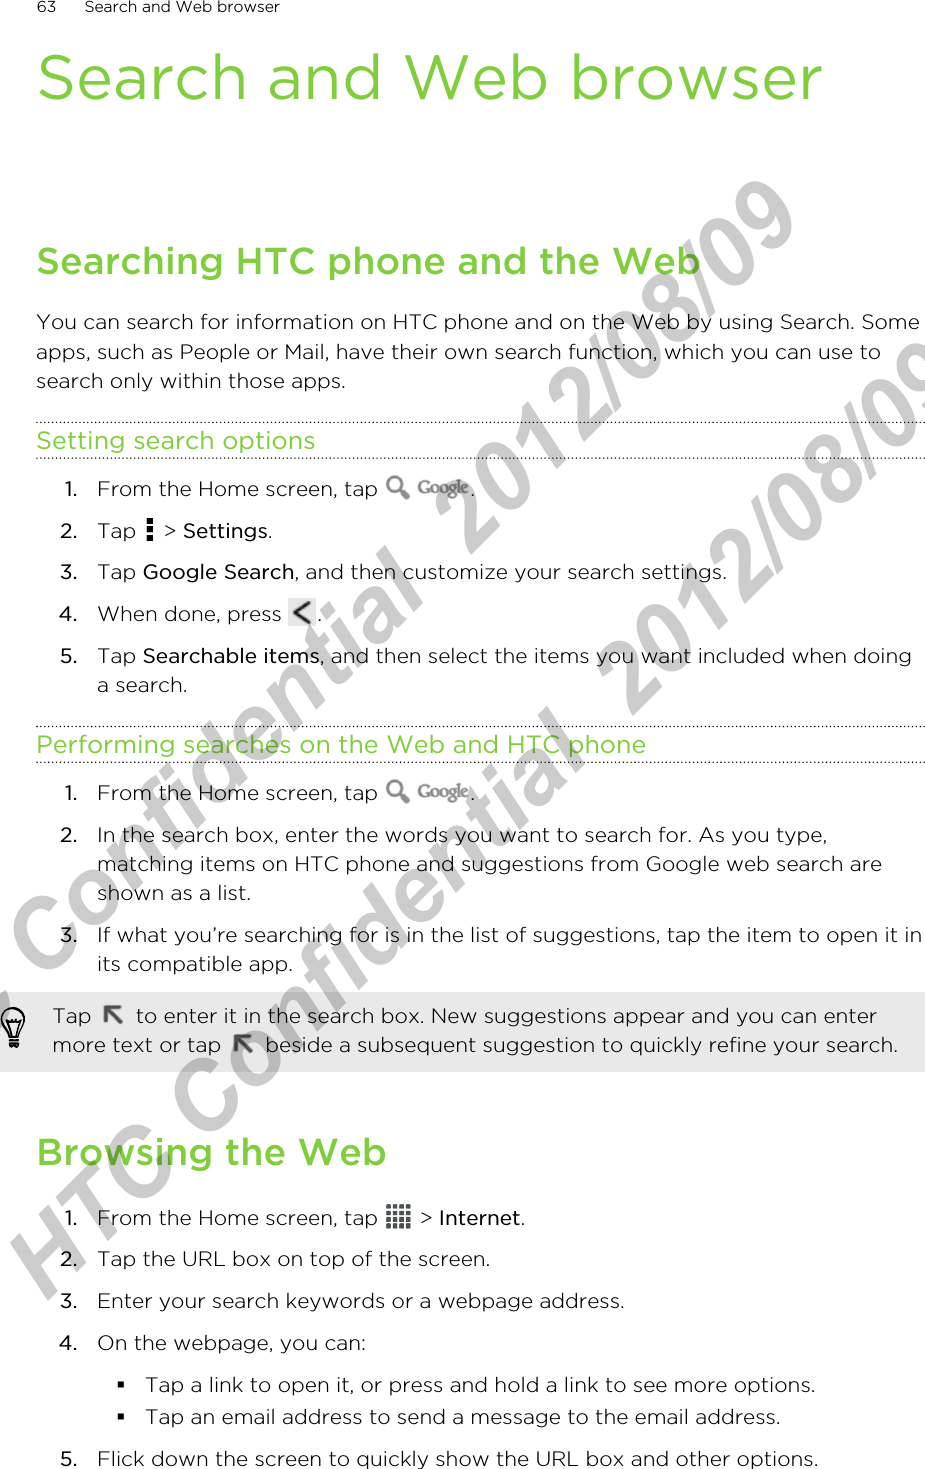 Search and Web browserSearching HTC phone and the WebYou can search for information on HTC phone and on the Web by using Search. Someapps, such as People or Mail, have their own search function, which you can use tosearch only within those apps.Setting search options1. From the Home screen, tap  .2. Tap   &gt; Settings.3. Tap Google Search, and then customize your search settings.4. When done, press  .5. Tap Searchable items, and then select the items you want included when doinga search.Performing searches on the Web and HTC phone1. From the Home screen, tap  .2. In the search box, enter the words you want to search for. As you type,matching items on HTC phone and suggestions from Google web search areshown as a list.3. If what you’re searching for is in the list of suggestions, tap the item to open it inits compatible app. Tap   to enter it in the search box. New suggestions appear and you can entermore text or tap   beside a subsequent suggestion to quickly refine your search.Browsing the Web1. From the Home screen, tap   &gt; Internet.2. Tap the URL box on top of the screen.3. Enter your search keywords or a webpage address.4. On the webpage, you can:§Tap a link to open it, or press and hold a link to see more options.§Tap an email address to send a message to the email address.5. Flick down the screen to quickly show the URL box and other options.63 Search and Web browserHTC Confidential  2012/08/09  HTC Confidential  2012/08/09 